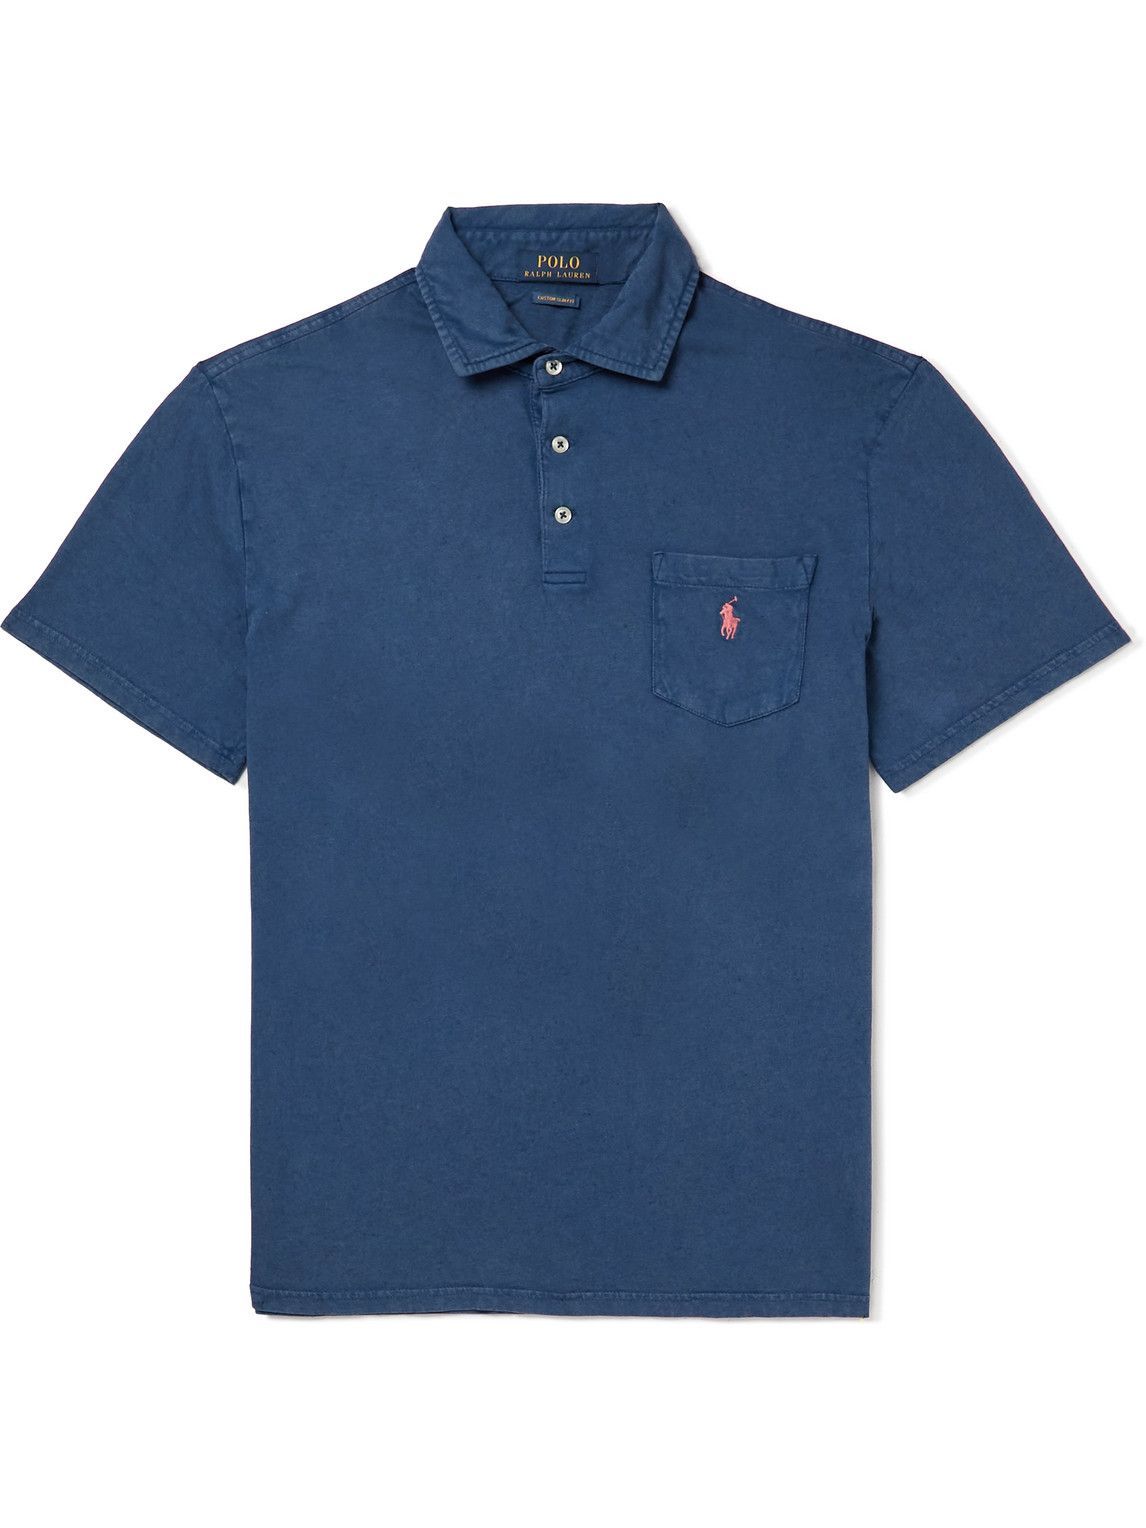 Polo Ralph Lauren - Slim-Fit Logo-Embroidered Garment-Dyed Cotton and Linen-Blend Polo Shirt - Blue